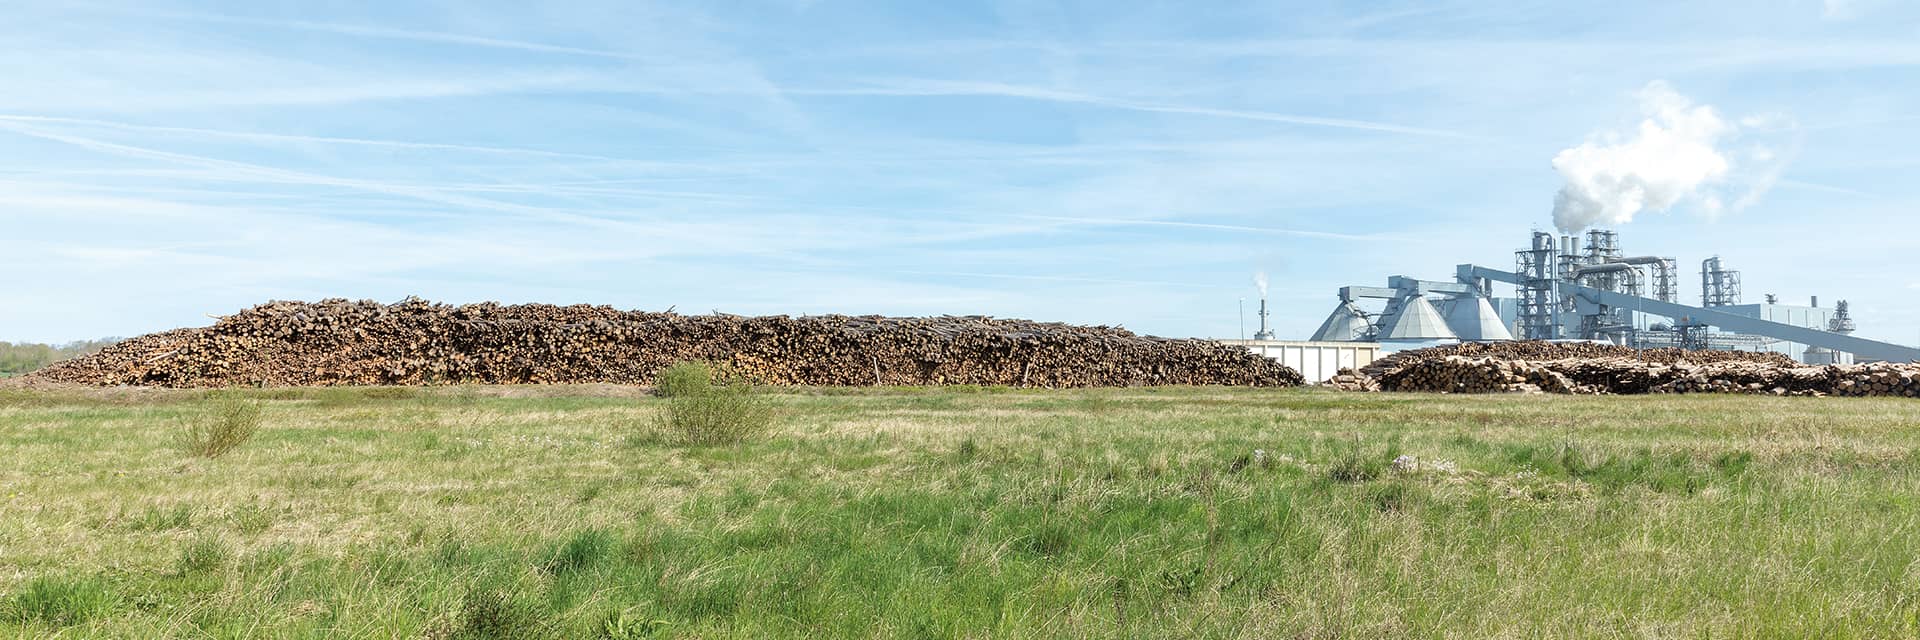 One of Unilin group's factories, handling wood waste